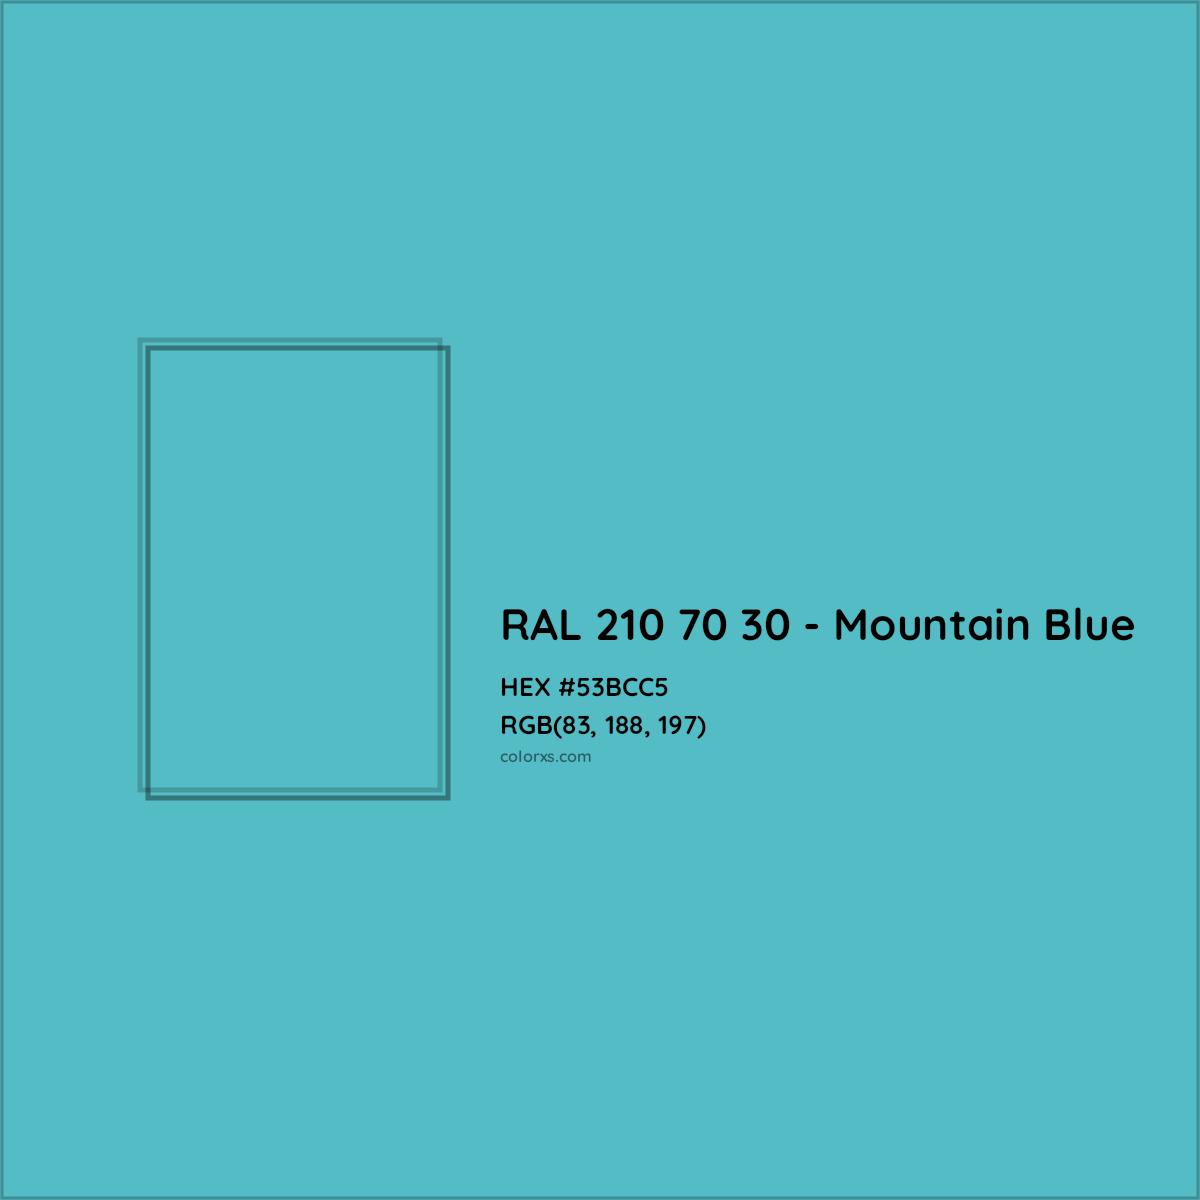 HEX #53BCC5 RAL 210 70 30 - Mountain Blue CMS RAL Design - Color Code